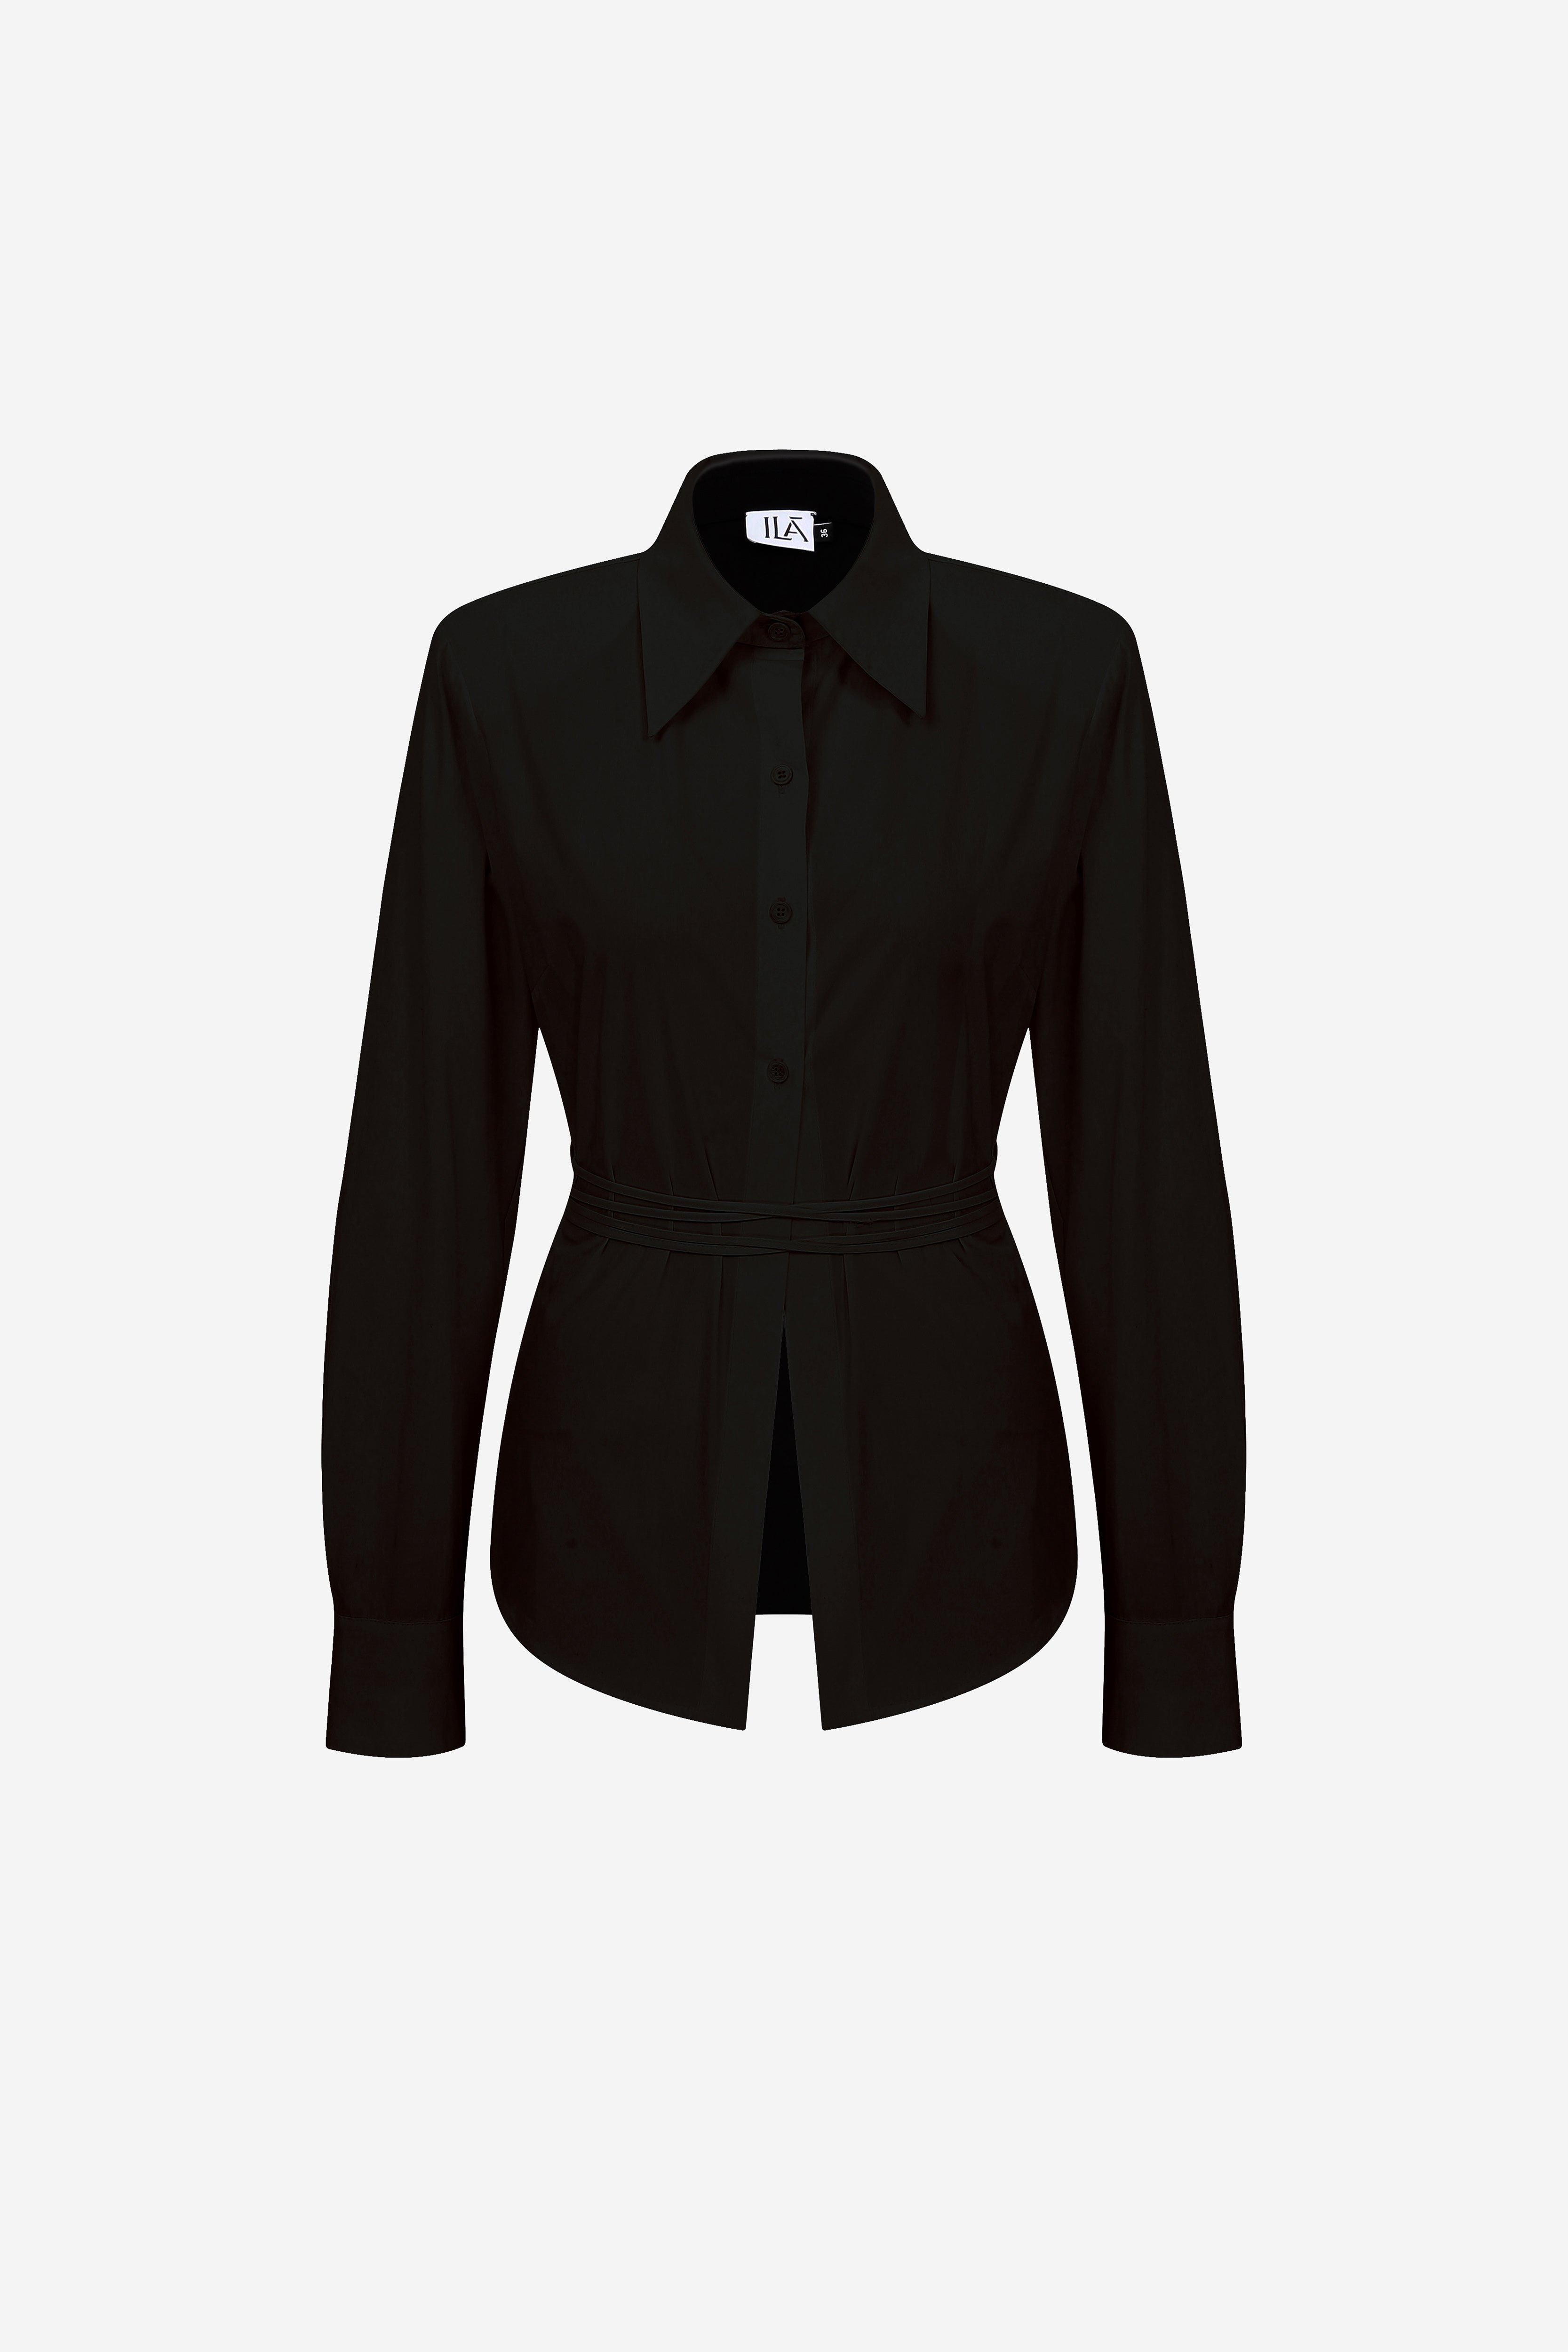 LUAN - COTTON SHIRT WITH SHOULDER PADS IN BLACK